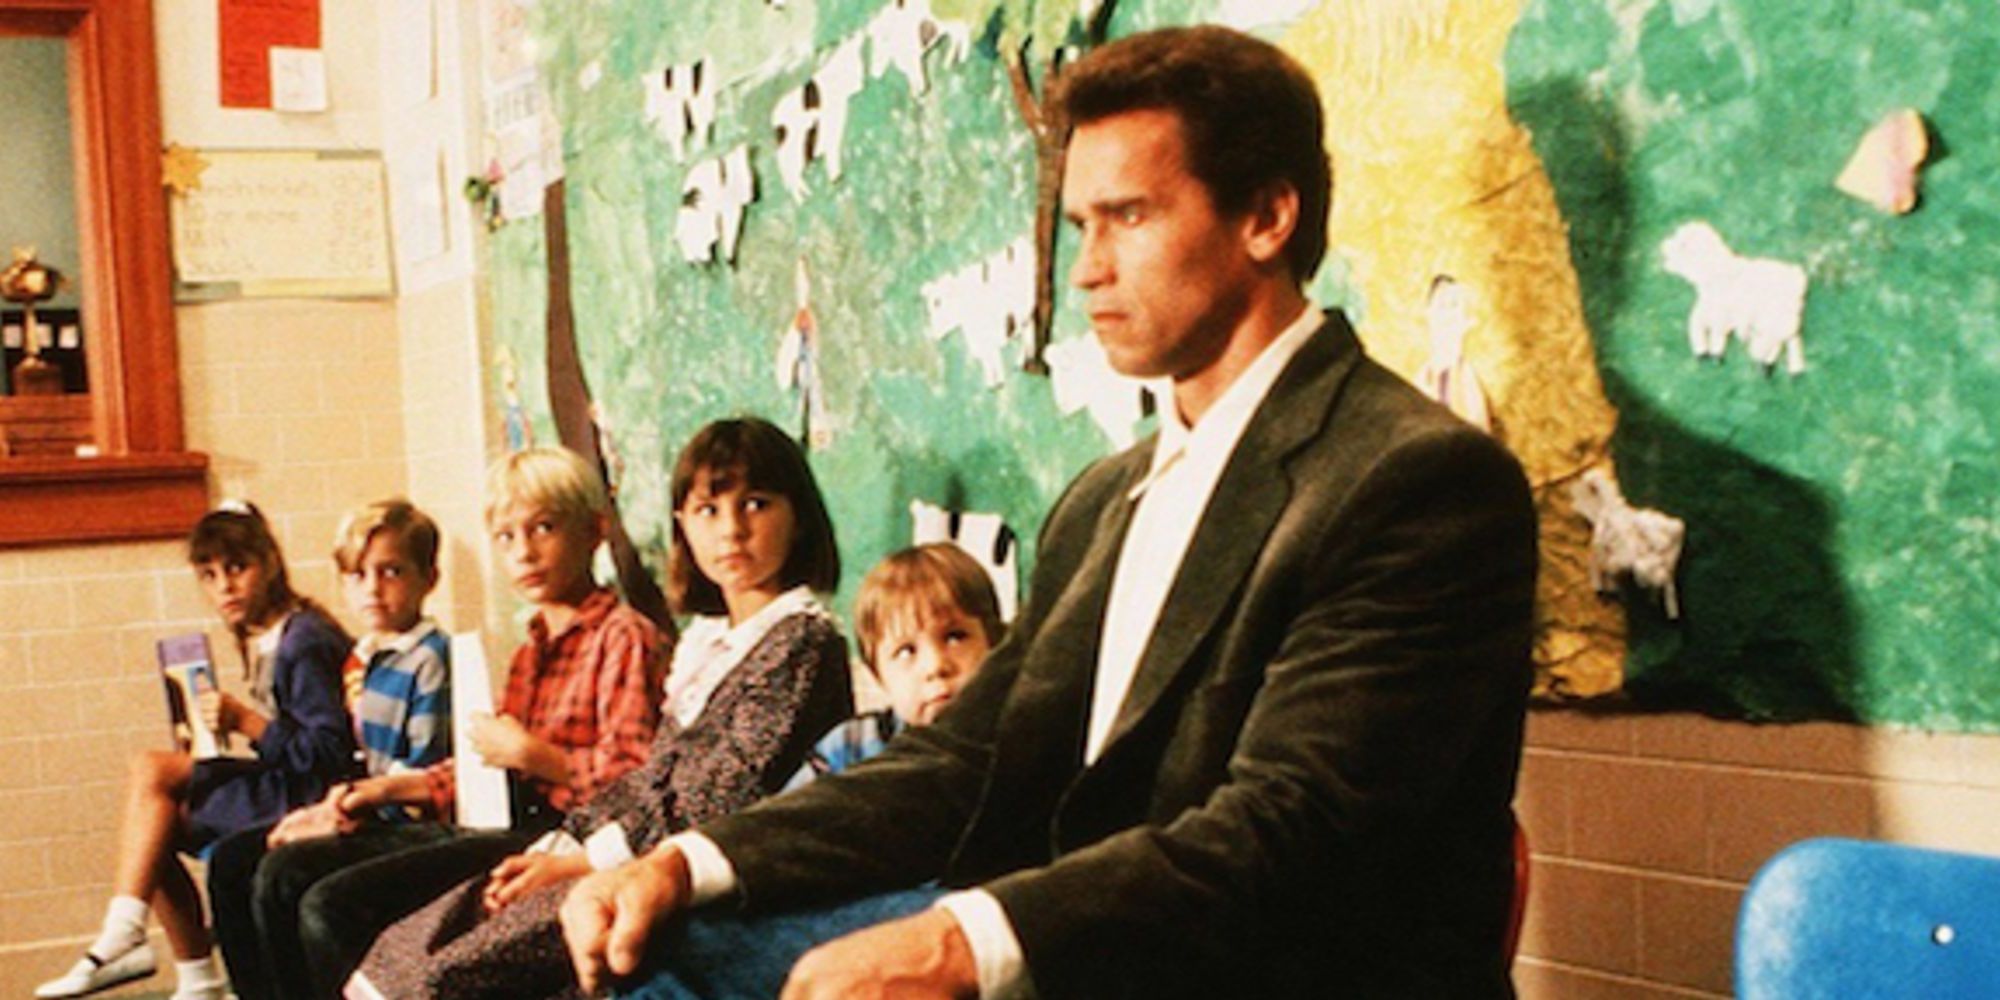 The 10 Most Inspirational Movie Teachers & Principals, Ranked